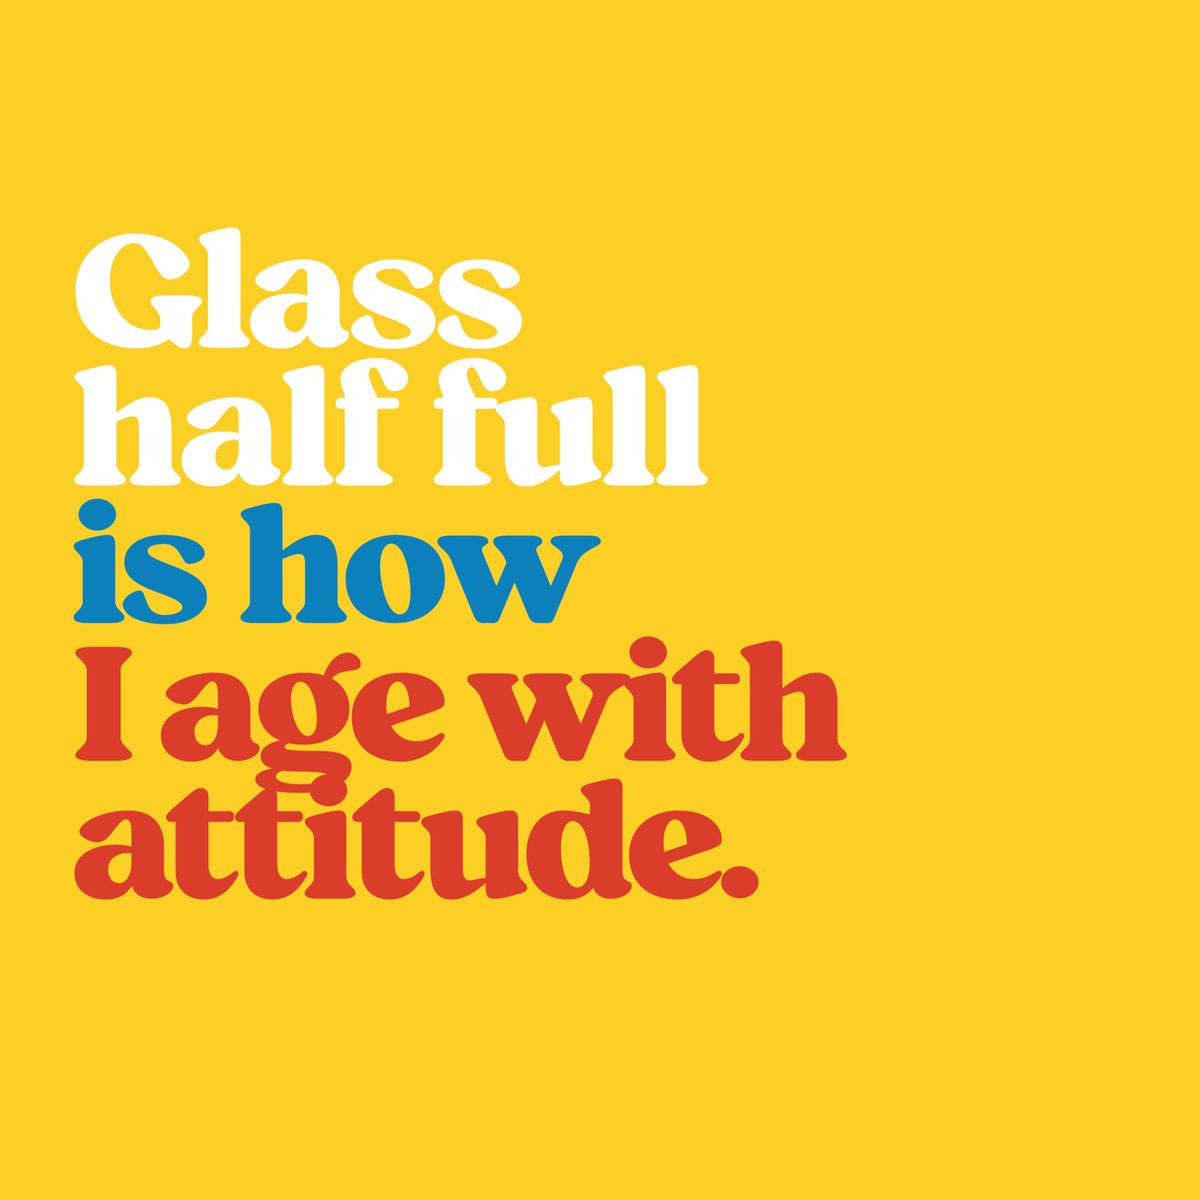 Glass half full is a simple way to look at things especially as you age. Learn About the Glass Half Full: Focusing on What has Not Been Lost and the Positives of Aging bit.ly/466TP3u #agingwithattitude #aginginplace #independentliving #thrivinginmotion #cherish